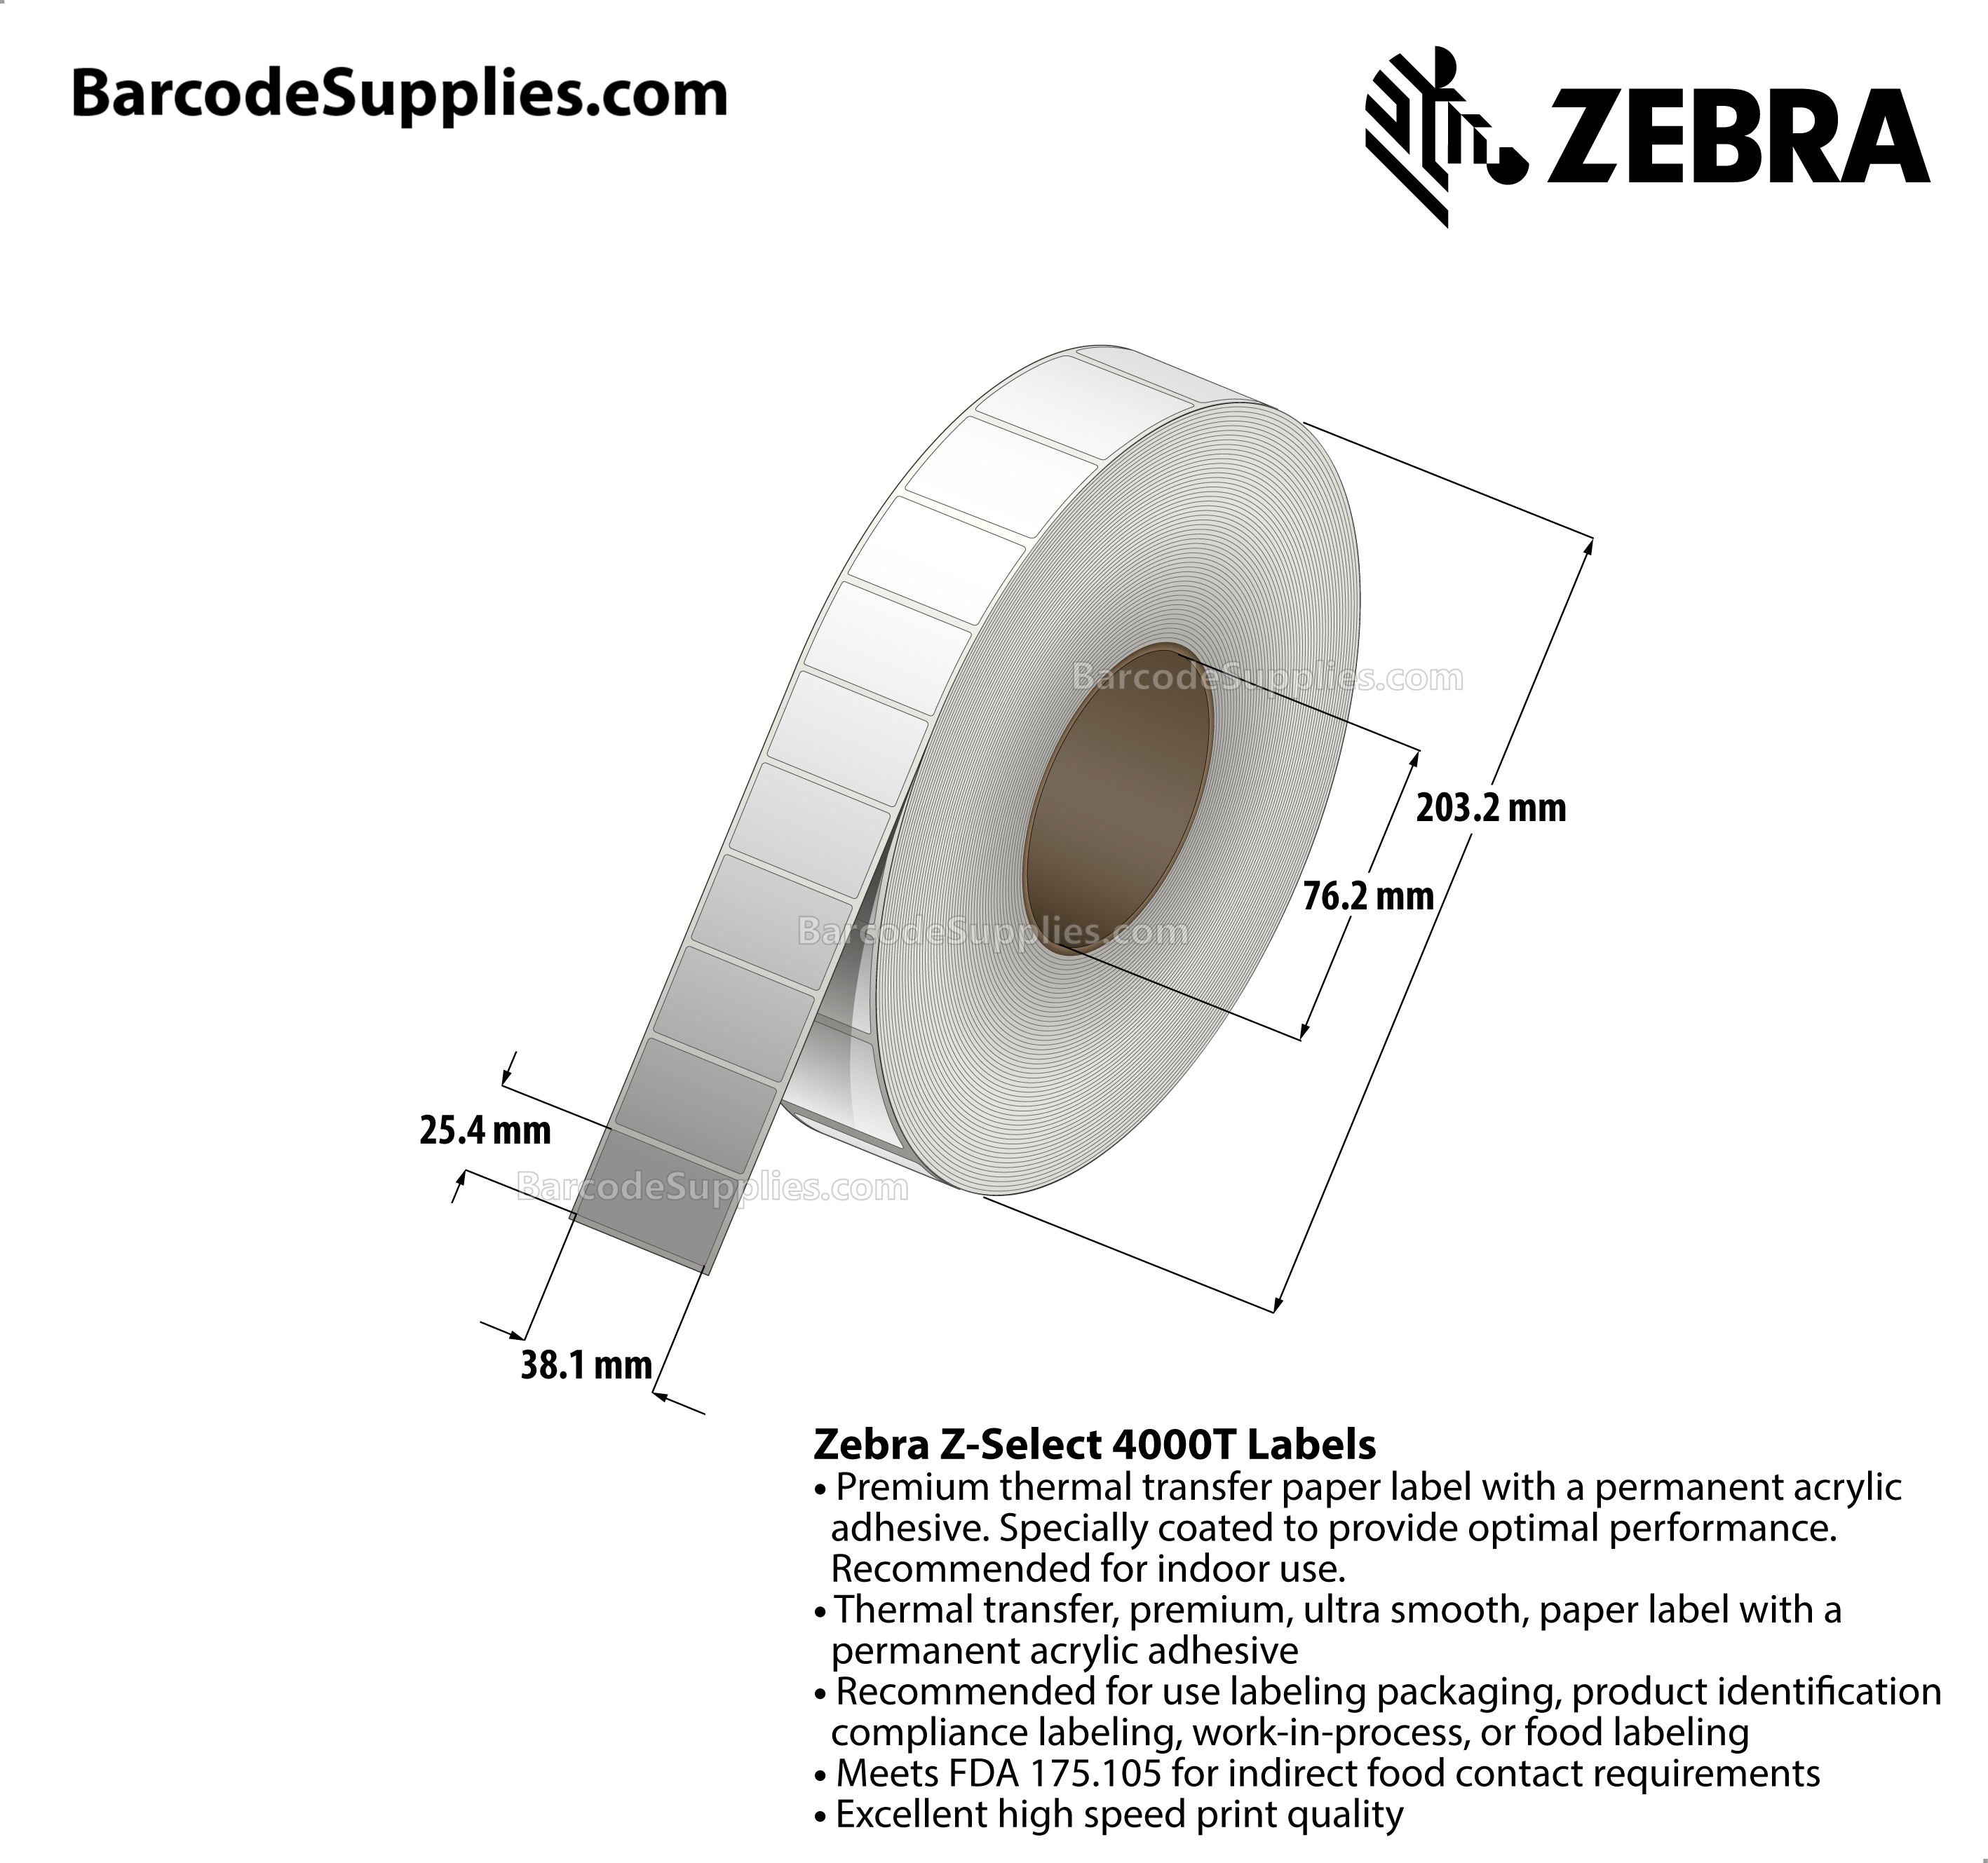 1.5 x 1 Thermal Transfer White Z-Select 4000T Labels With Permanent Adhesive - Not Perforated - 5180 Labels Per Roll - Carton Of 14 Rolls - 72520 Labels Total - MPN: 72280